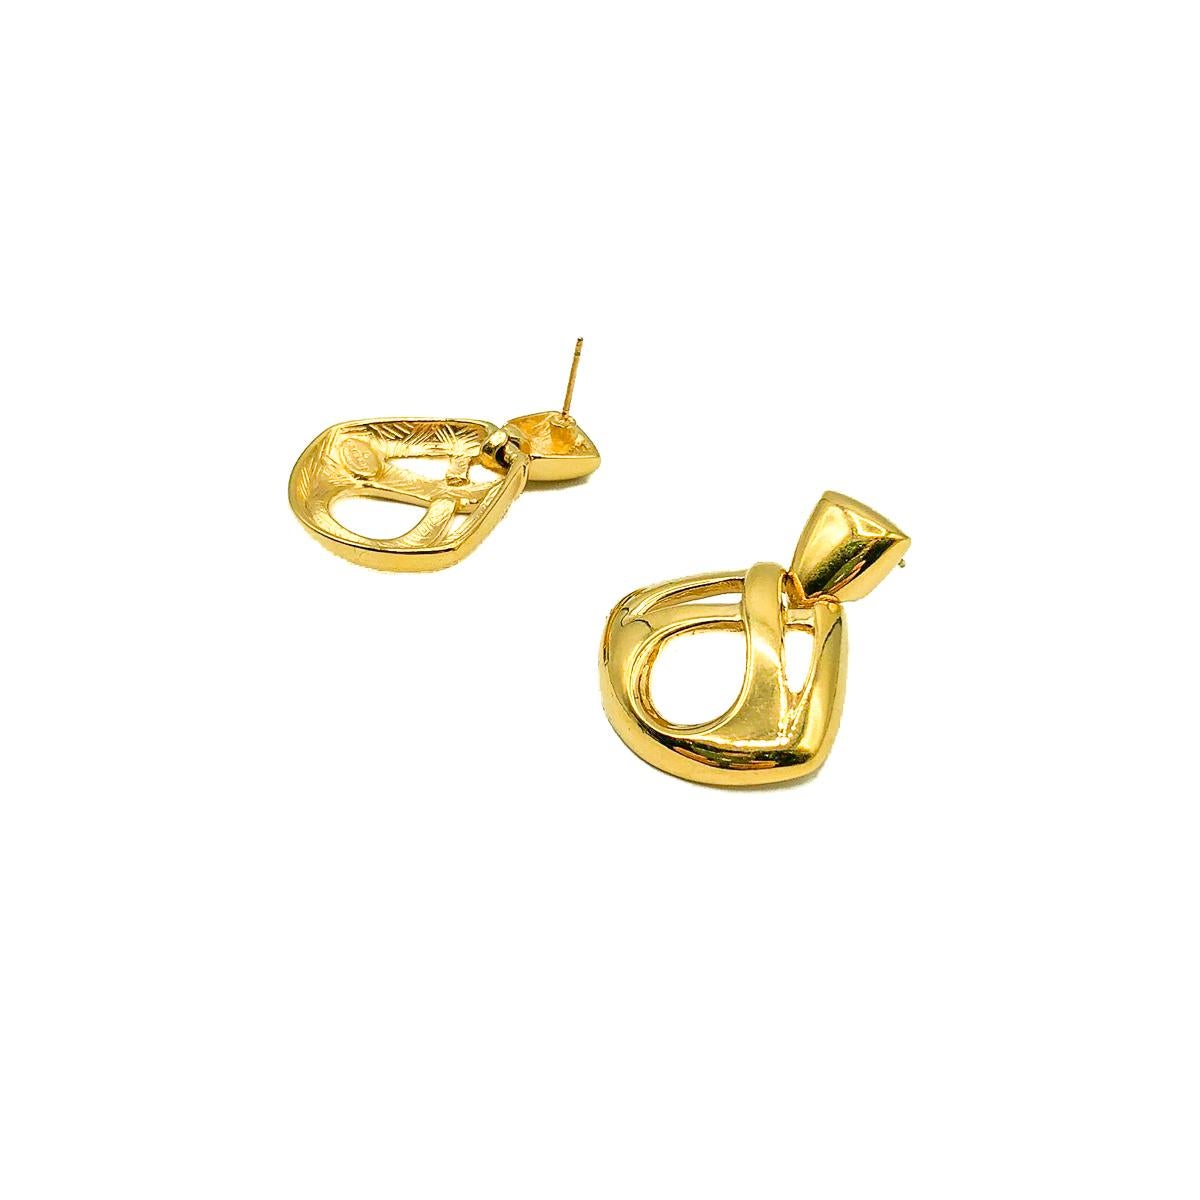 Vintage Givenchy Infinity Earrings 1980s In Good Condition For Sale In Wilmslow, GB